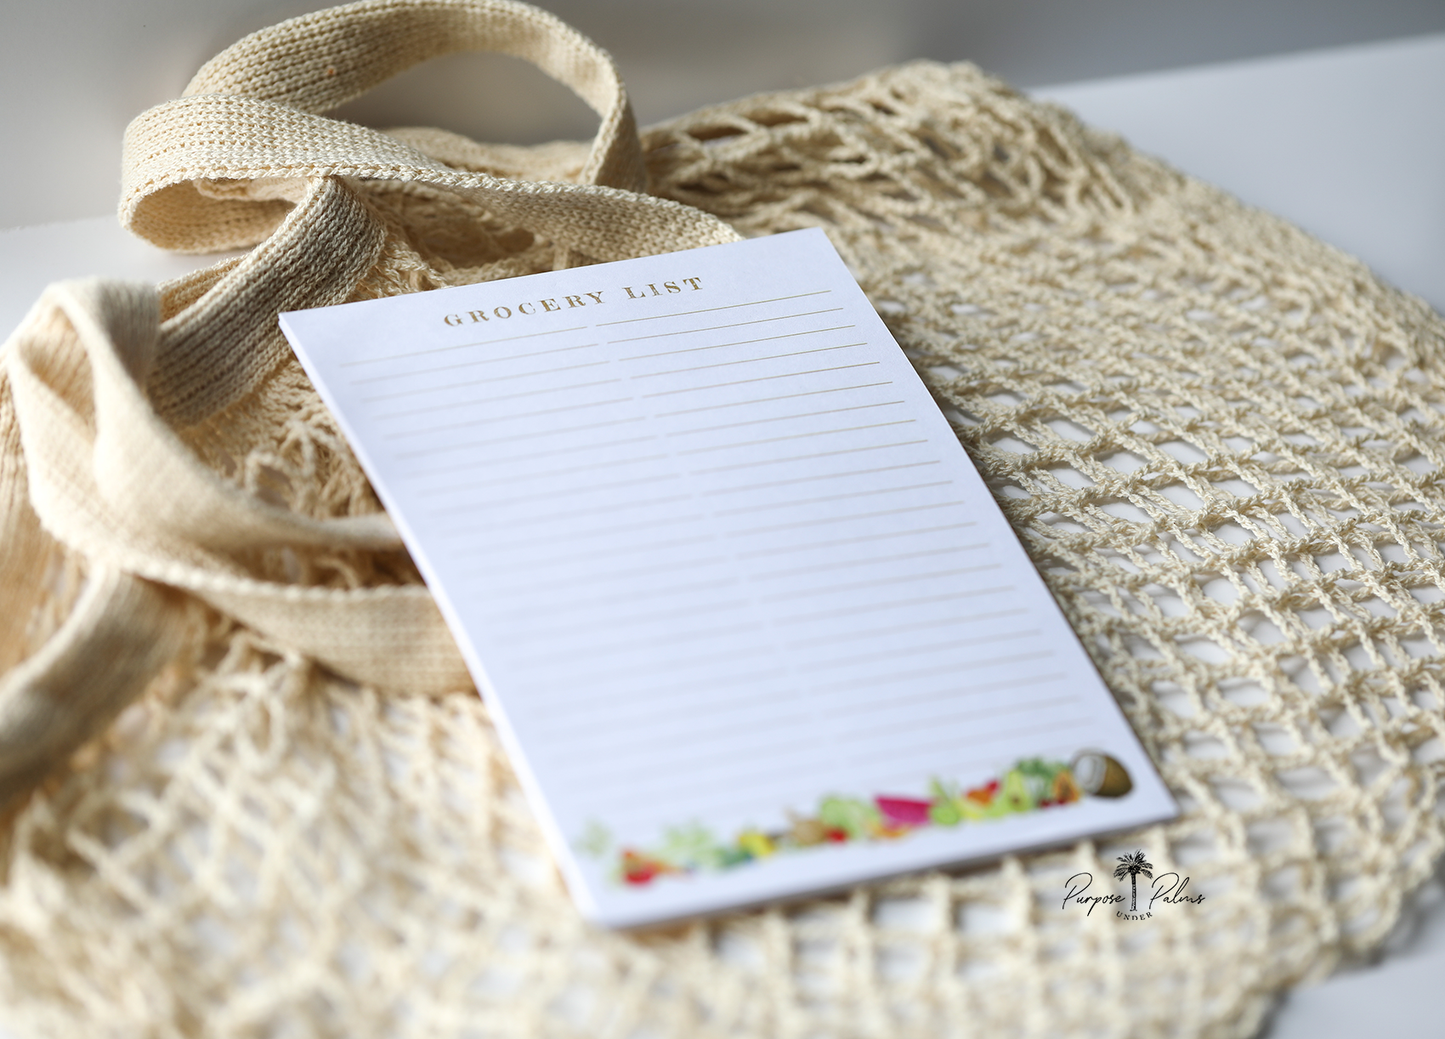 white grocery list notepad with grocery list at the top and two lined columns. watercolor fruits and vegetables at the bottom.